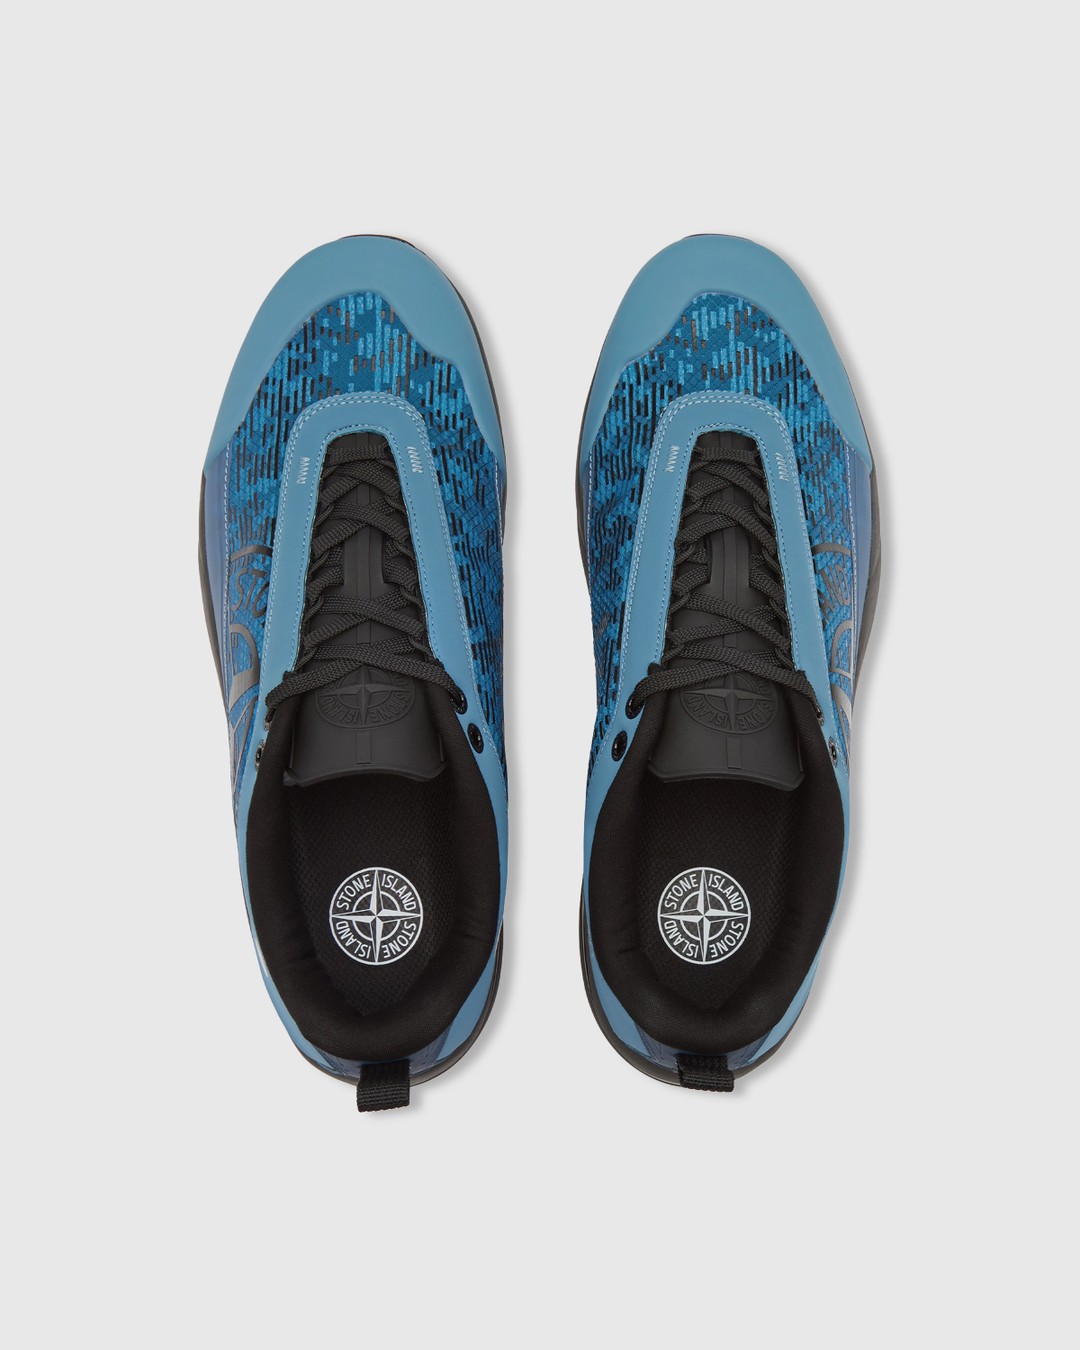 Stone Island – Grime Turquoise 78FWS033 - Sneakers - Blue - Image 4